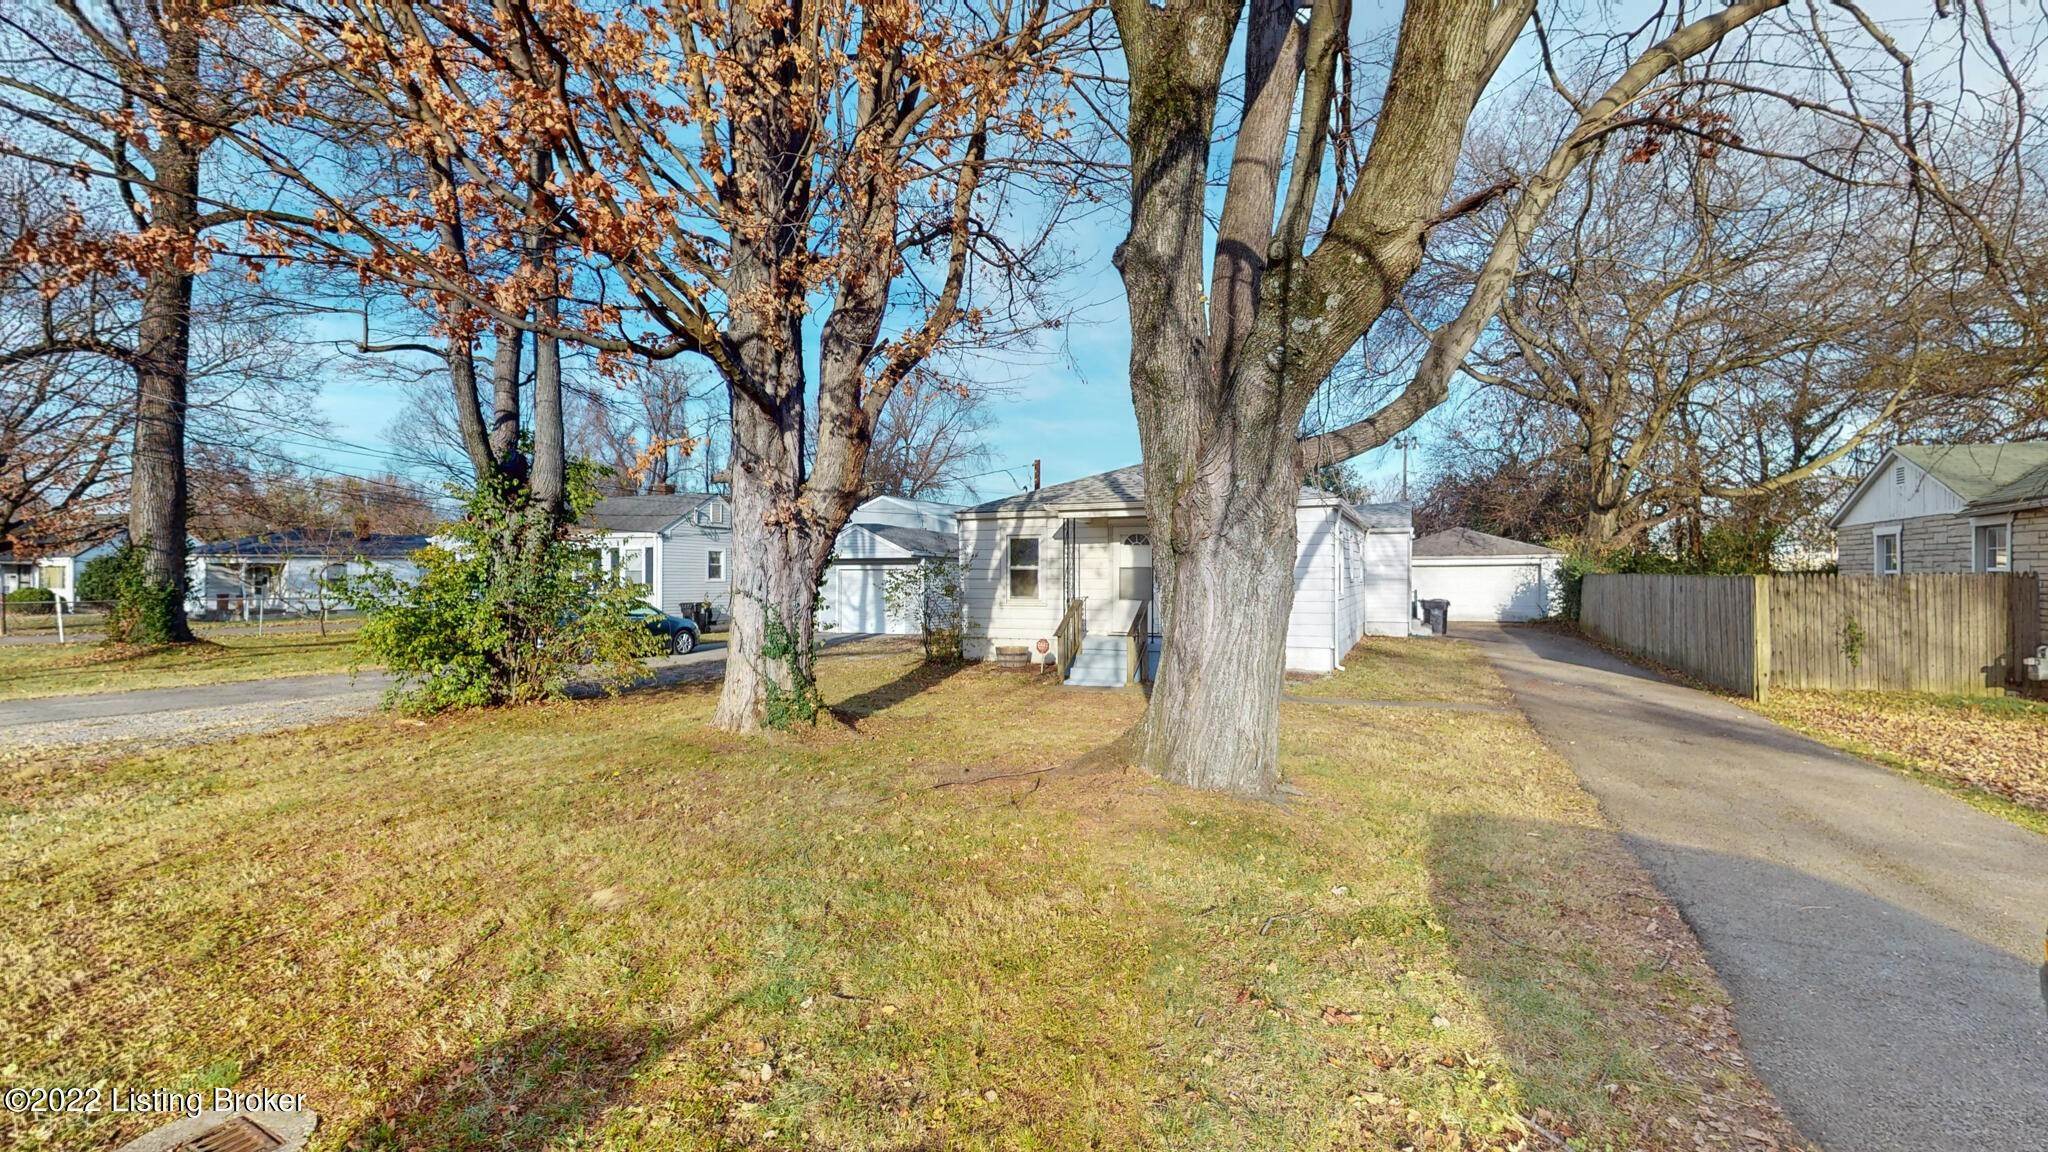 27. Single Family at Louisville, KY 40213